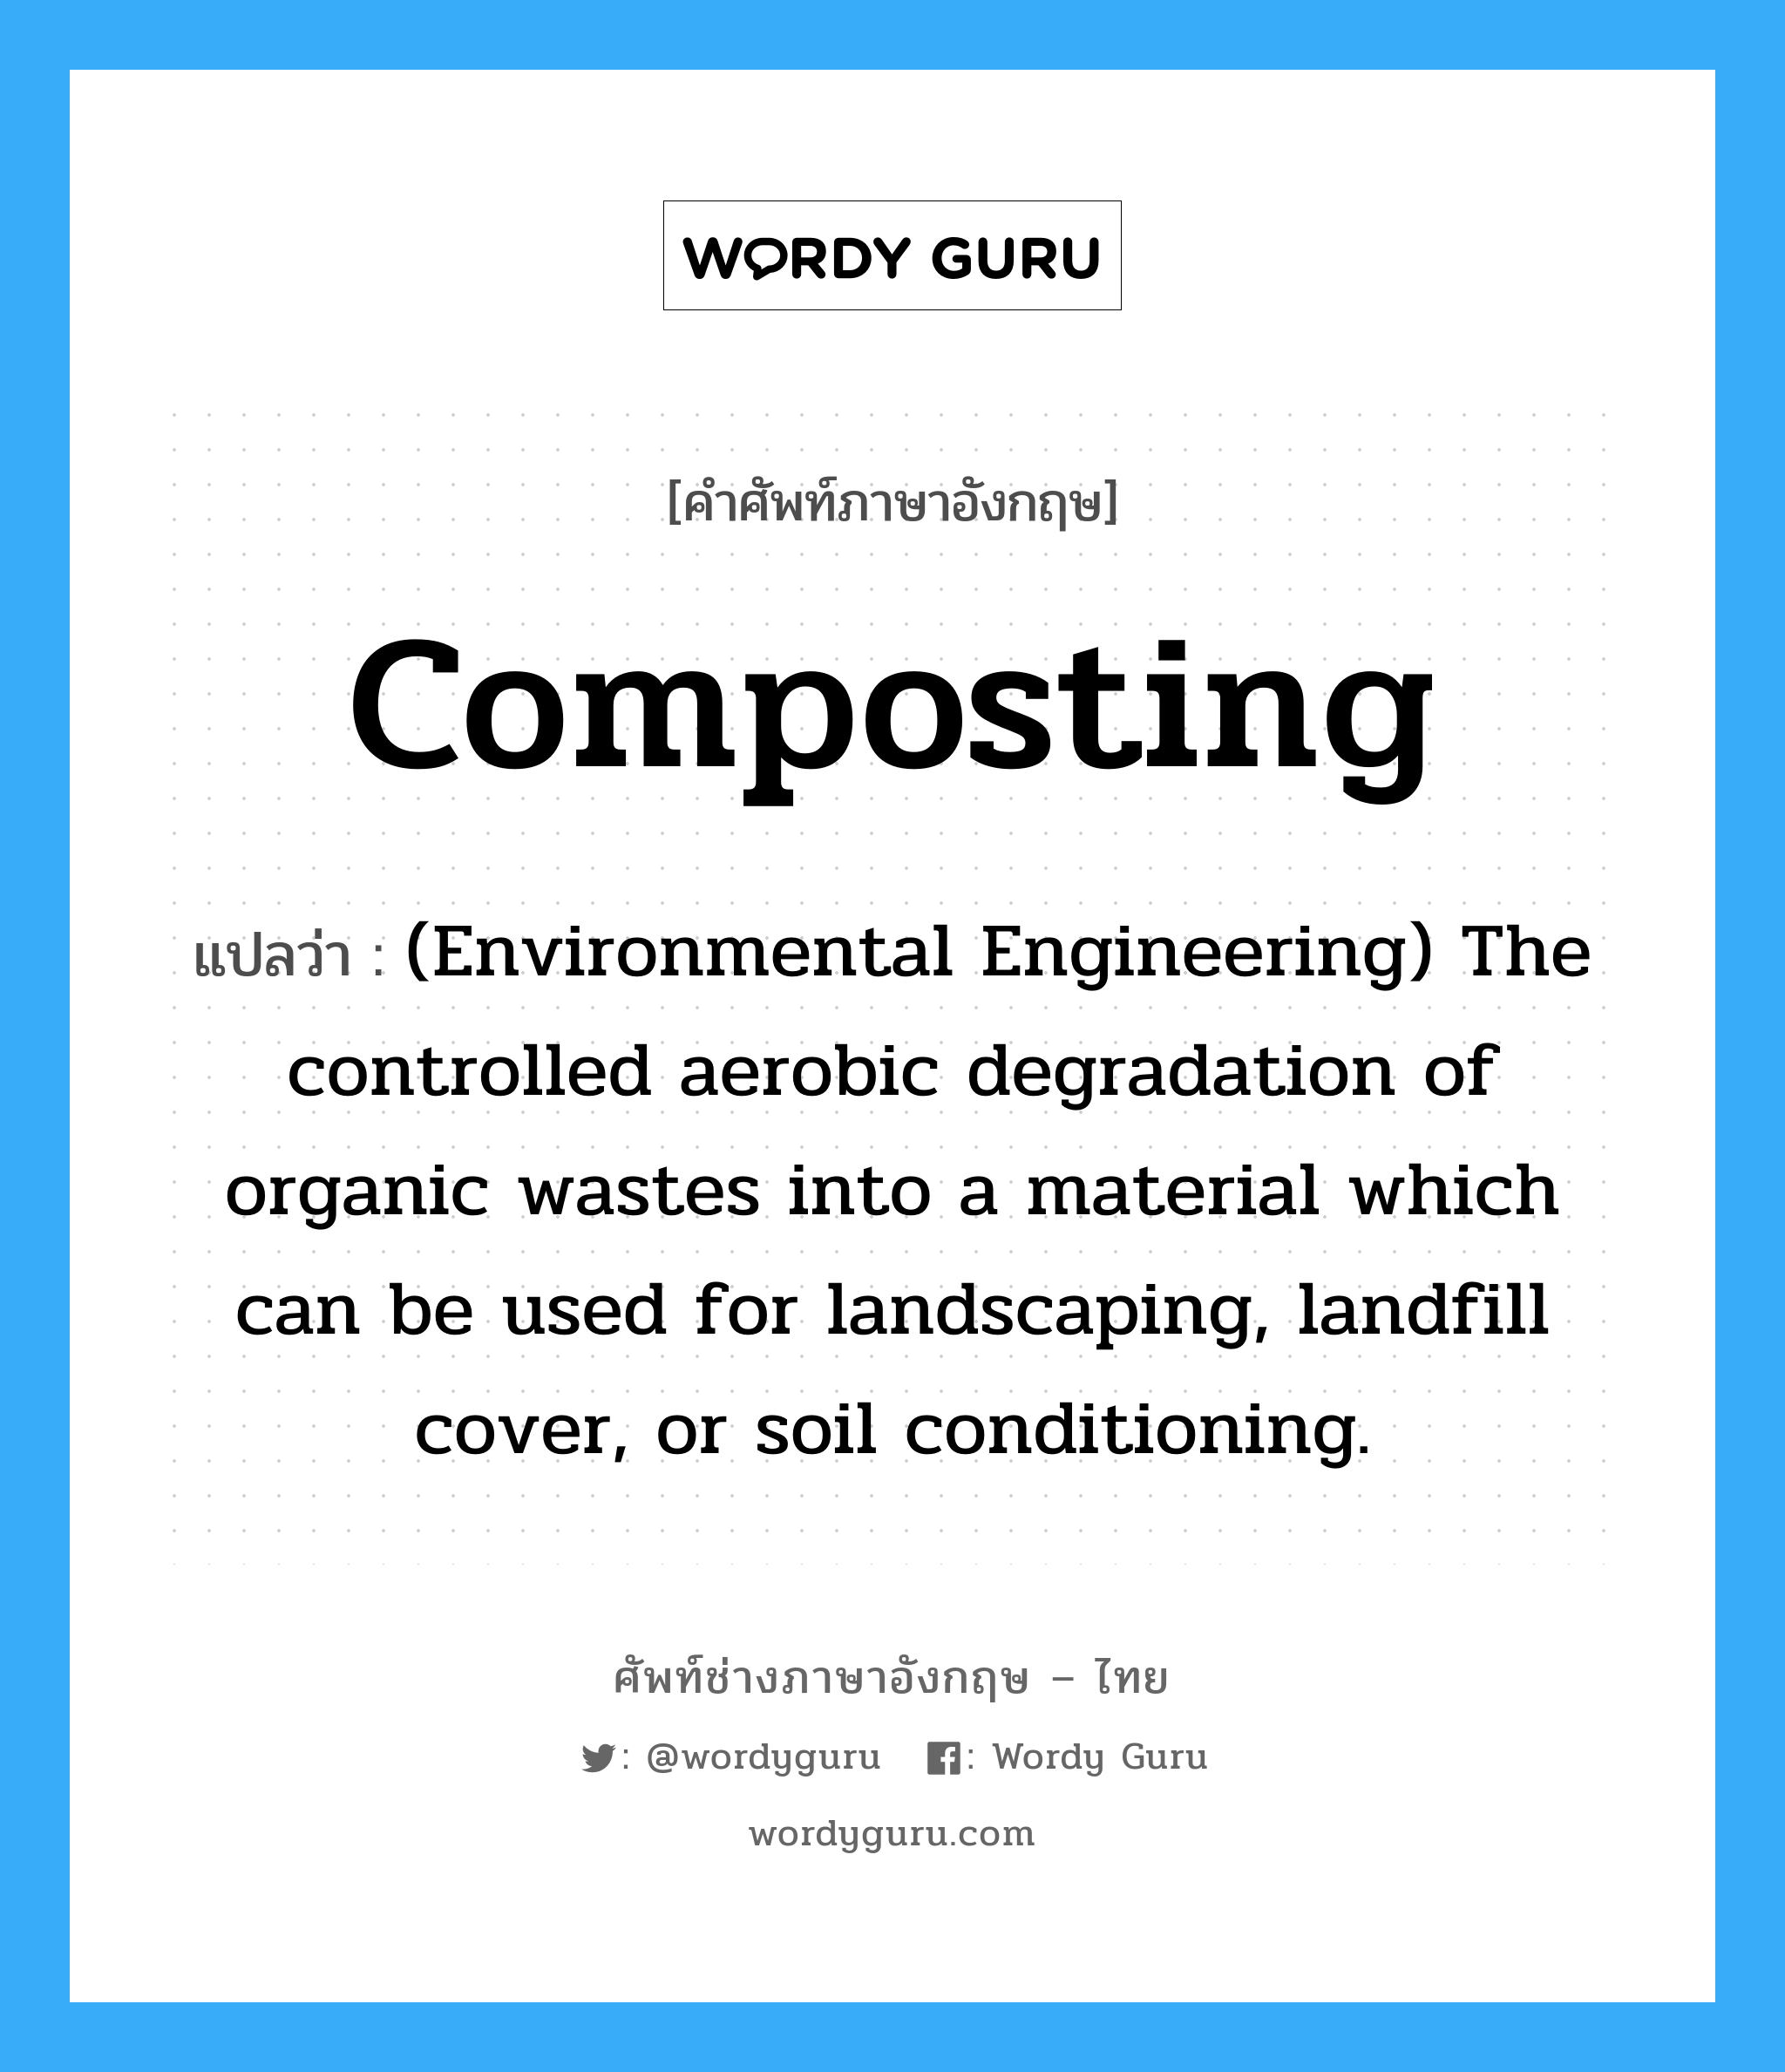 (Environmental Engineering) The controlled aerobic degradation of organic wastes into a material which can be used for landscaping, landfill cover, or soil conditioning. ภาษาอังกฤษ?, คำศัพท์ช่างภาษาอังกฤษ - ไทย (Environmental Engineering) The controlled aerobic degradation of organic wastes into a material which can be used for landscaping, landfill cover, or soil conditioning. คำศัพท์ภาษาอังกฤษ (Environmental Engineering) The controlled aerobic degradation of organic wastes into a material which can be used for landscaping, landfill cover, or soil conditioning. แปลว่า Composting